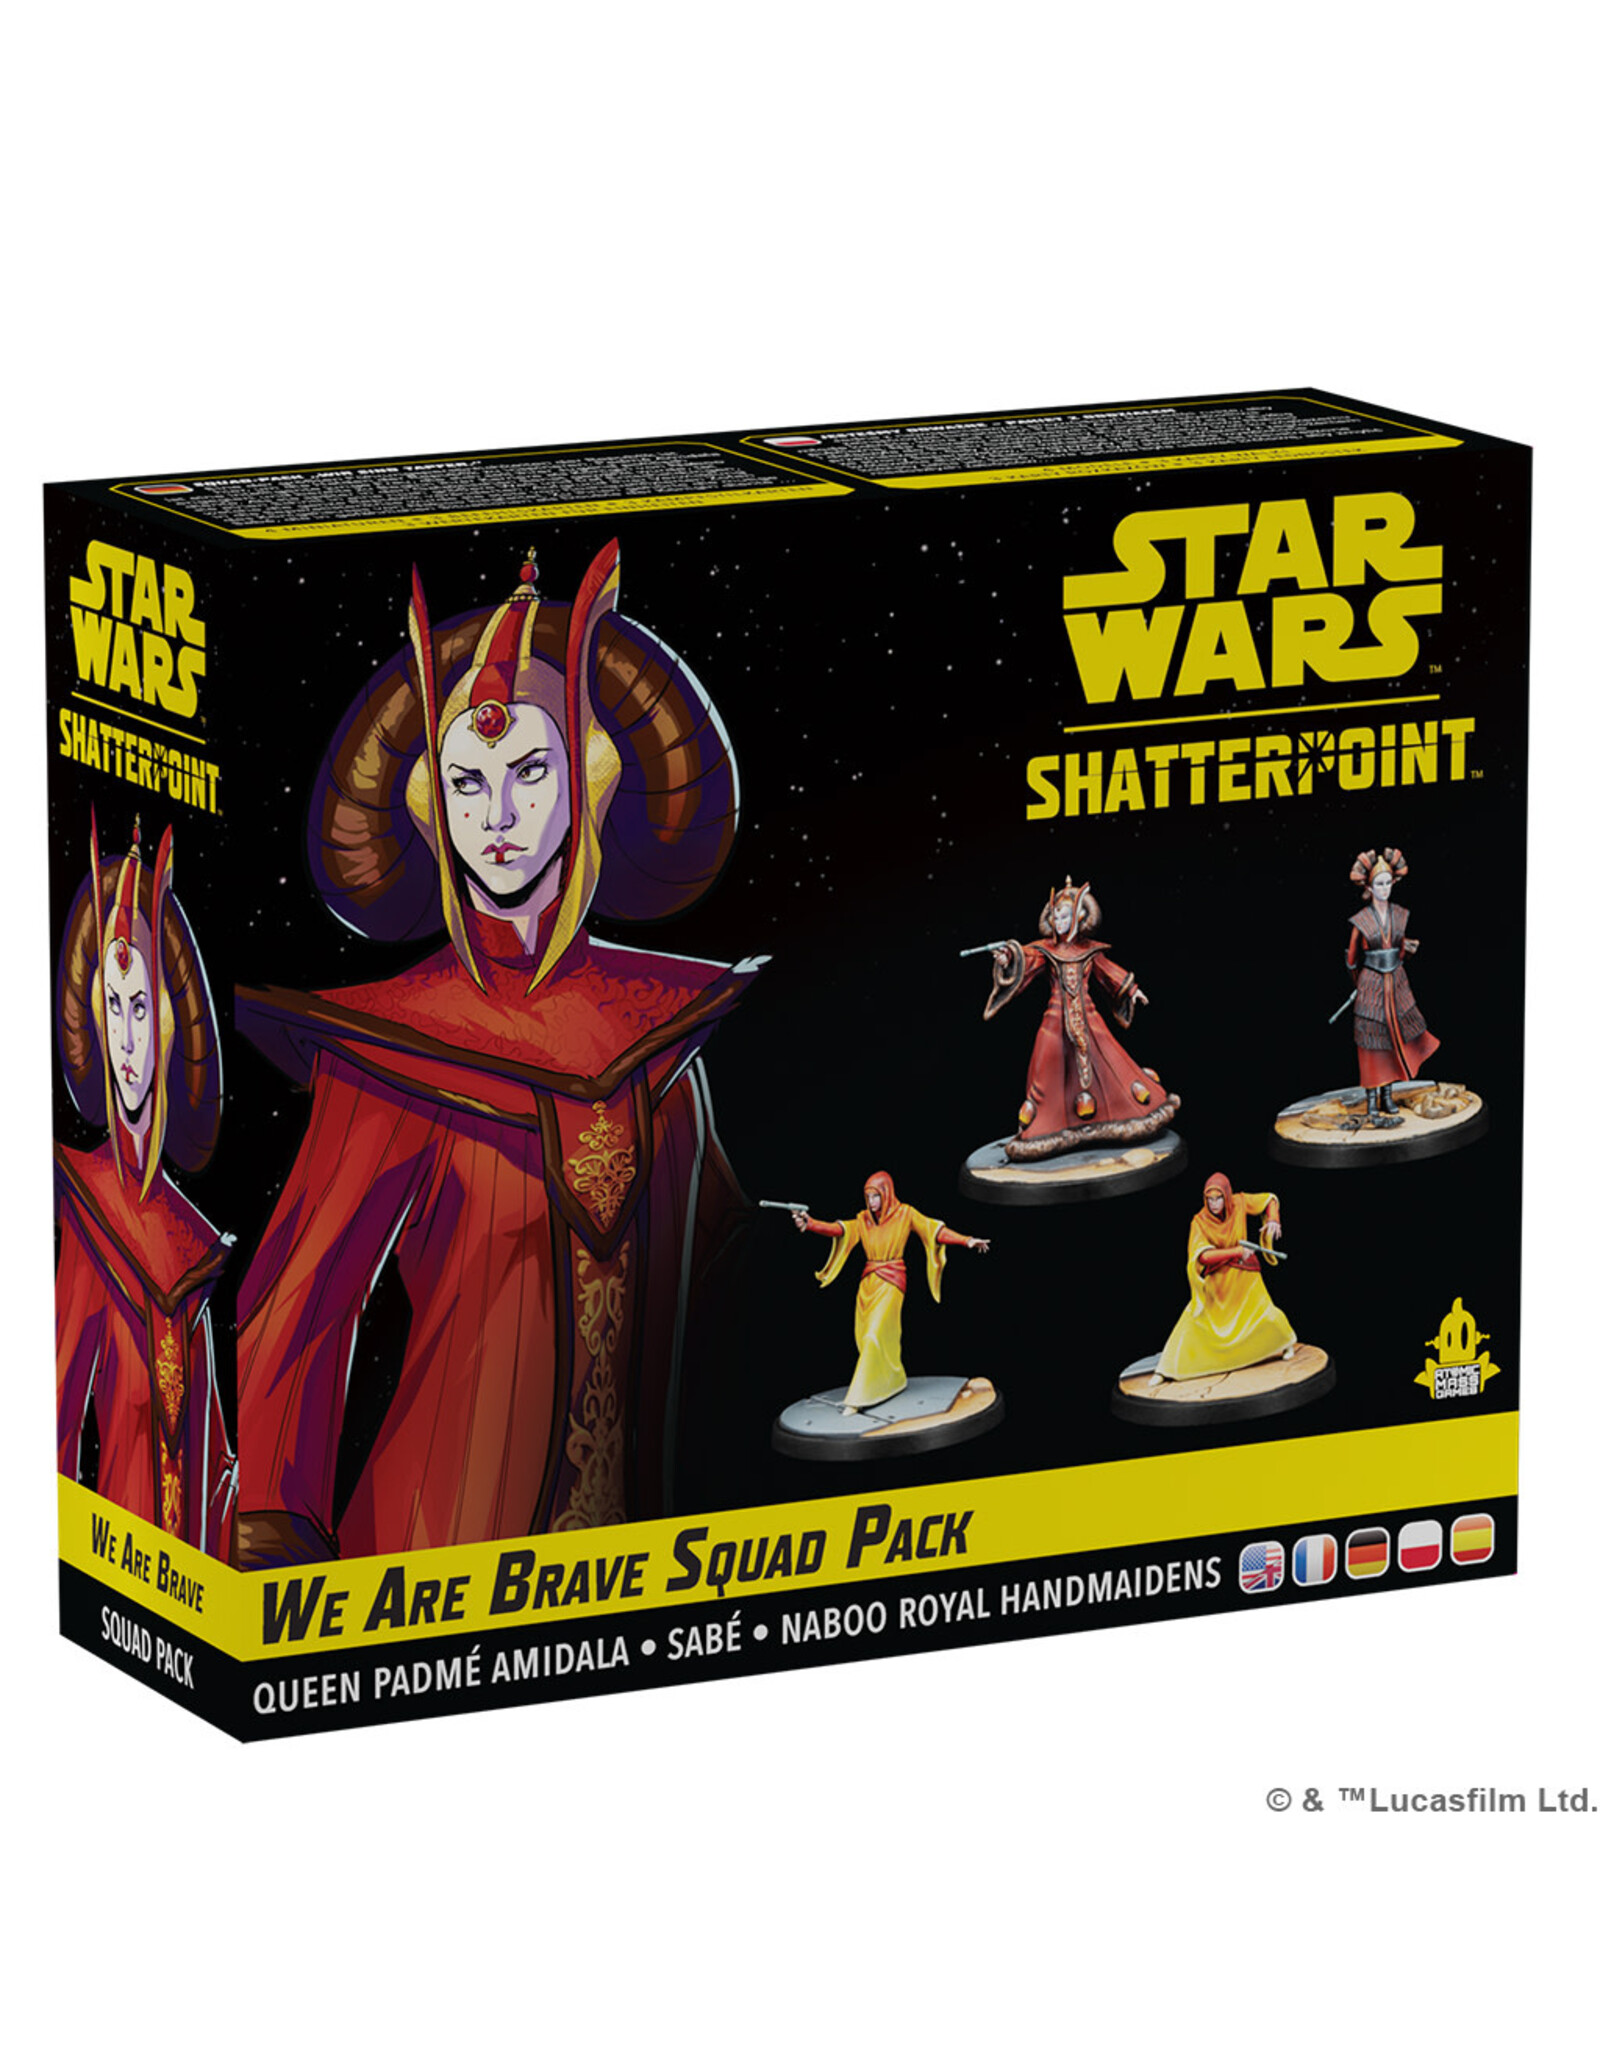 Atomic Mass Games Star Wars: Shatterpoint - We Are Brave: Queen Padme Amidala Squad Pack